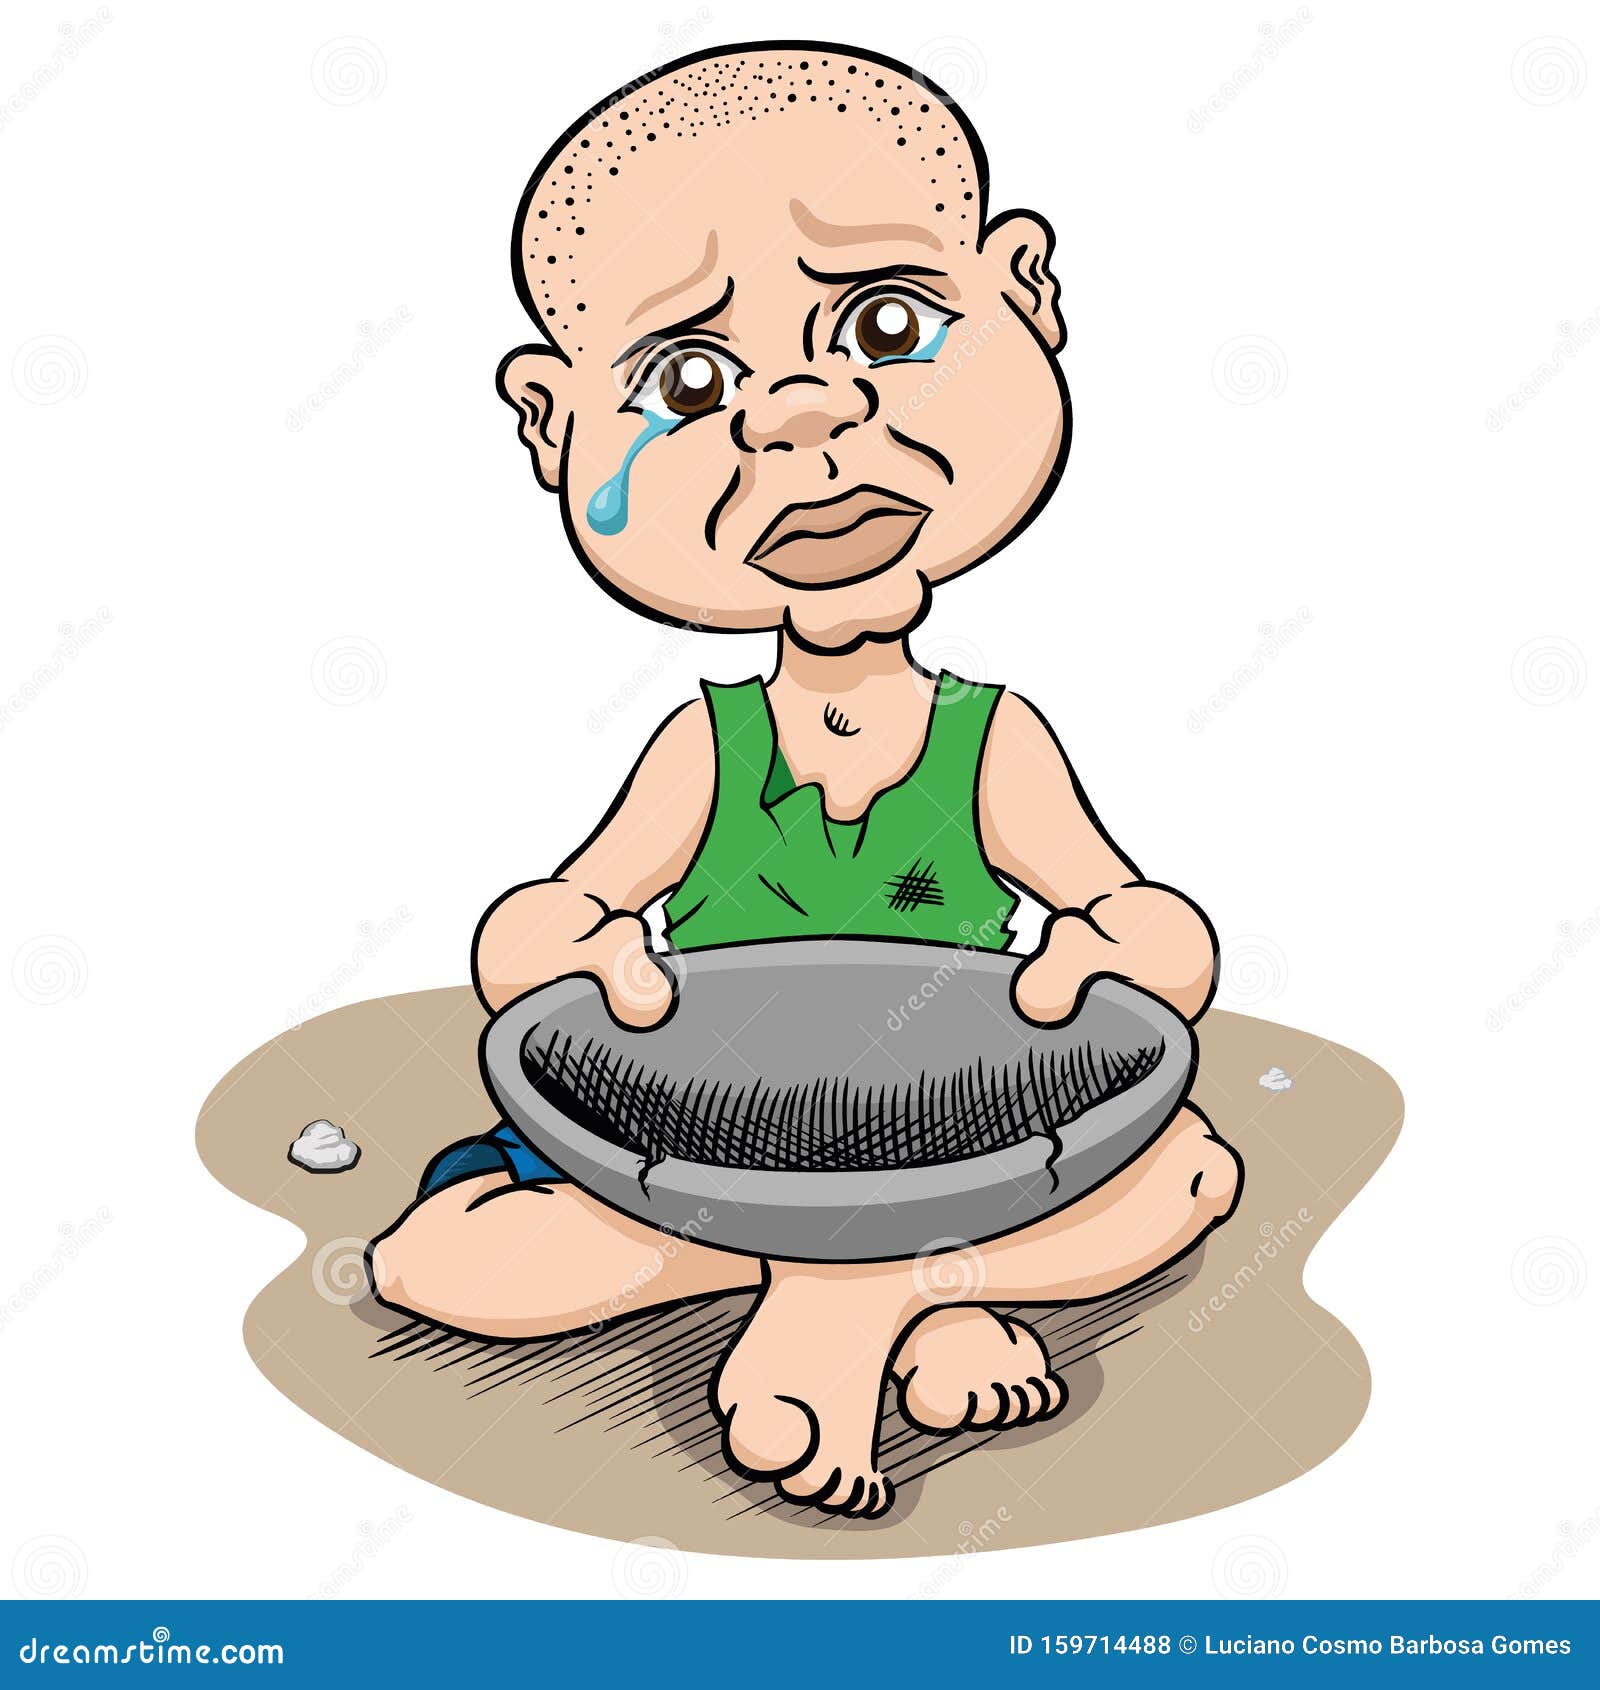 Illustration Depicting a Hungry Needy Child without Food Starving,  Caucasian Stock Vector - Illustration of depicting, humanitarian: 159714488